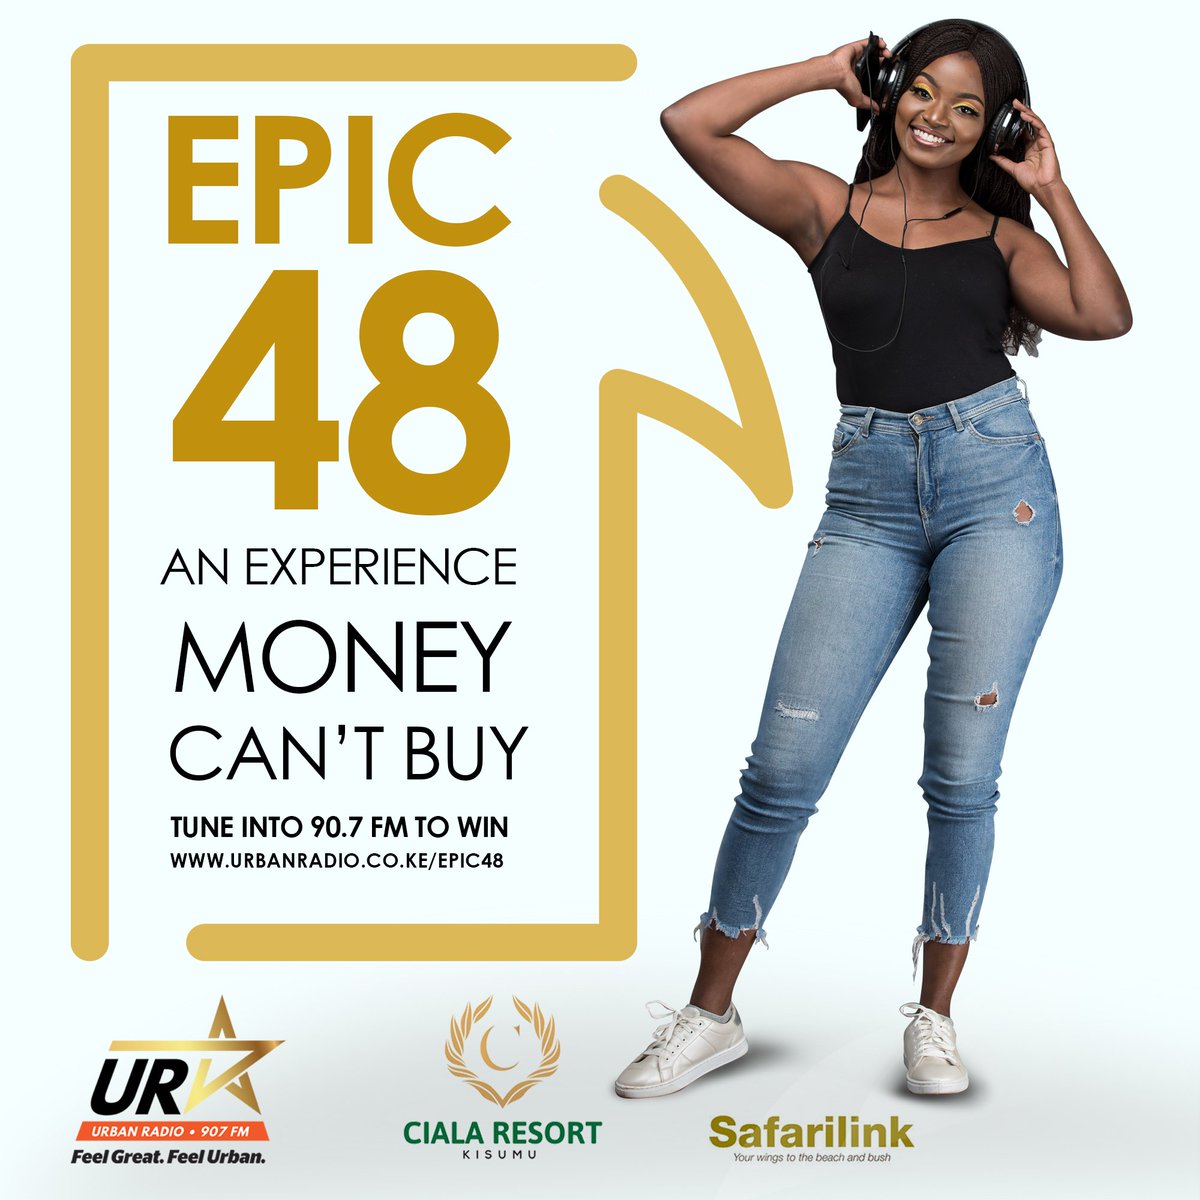 Only a few hours left before registrations for EPIC48 close. Head over to urbanradio.co.ke/epic48 now. Don't miss the chance to win a weekend filled with unforgettable memories.